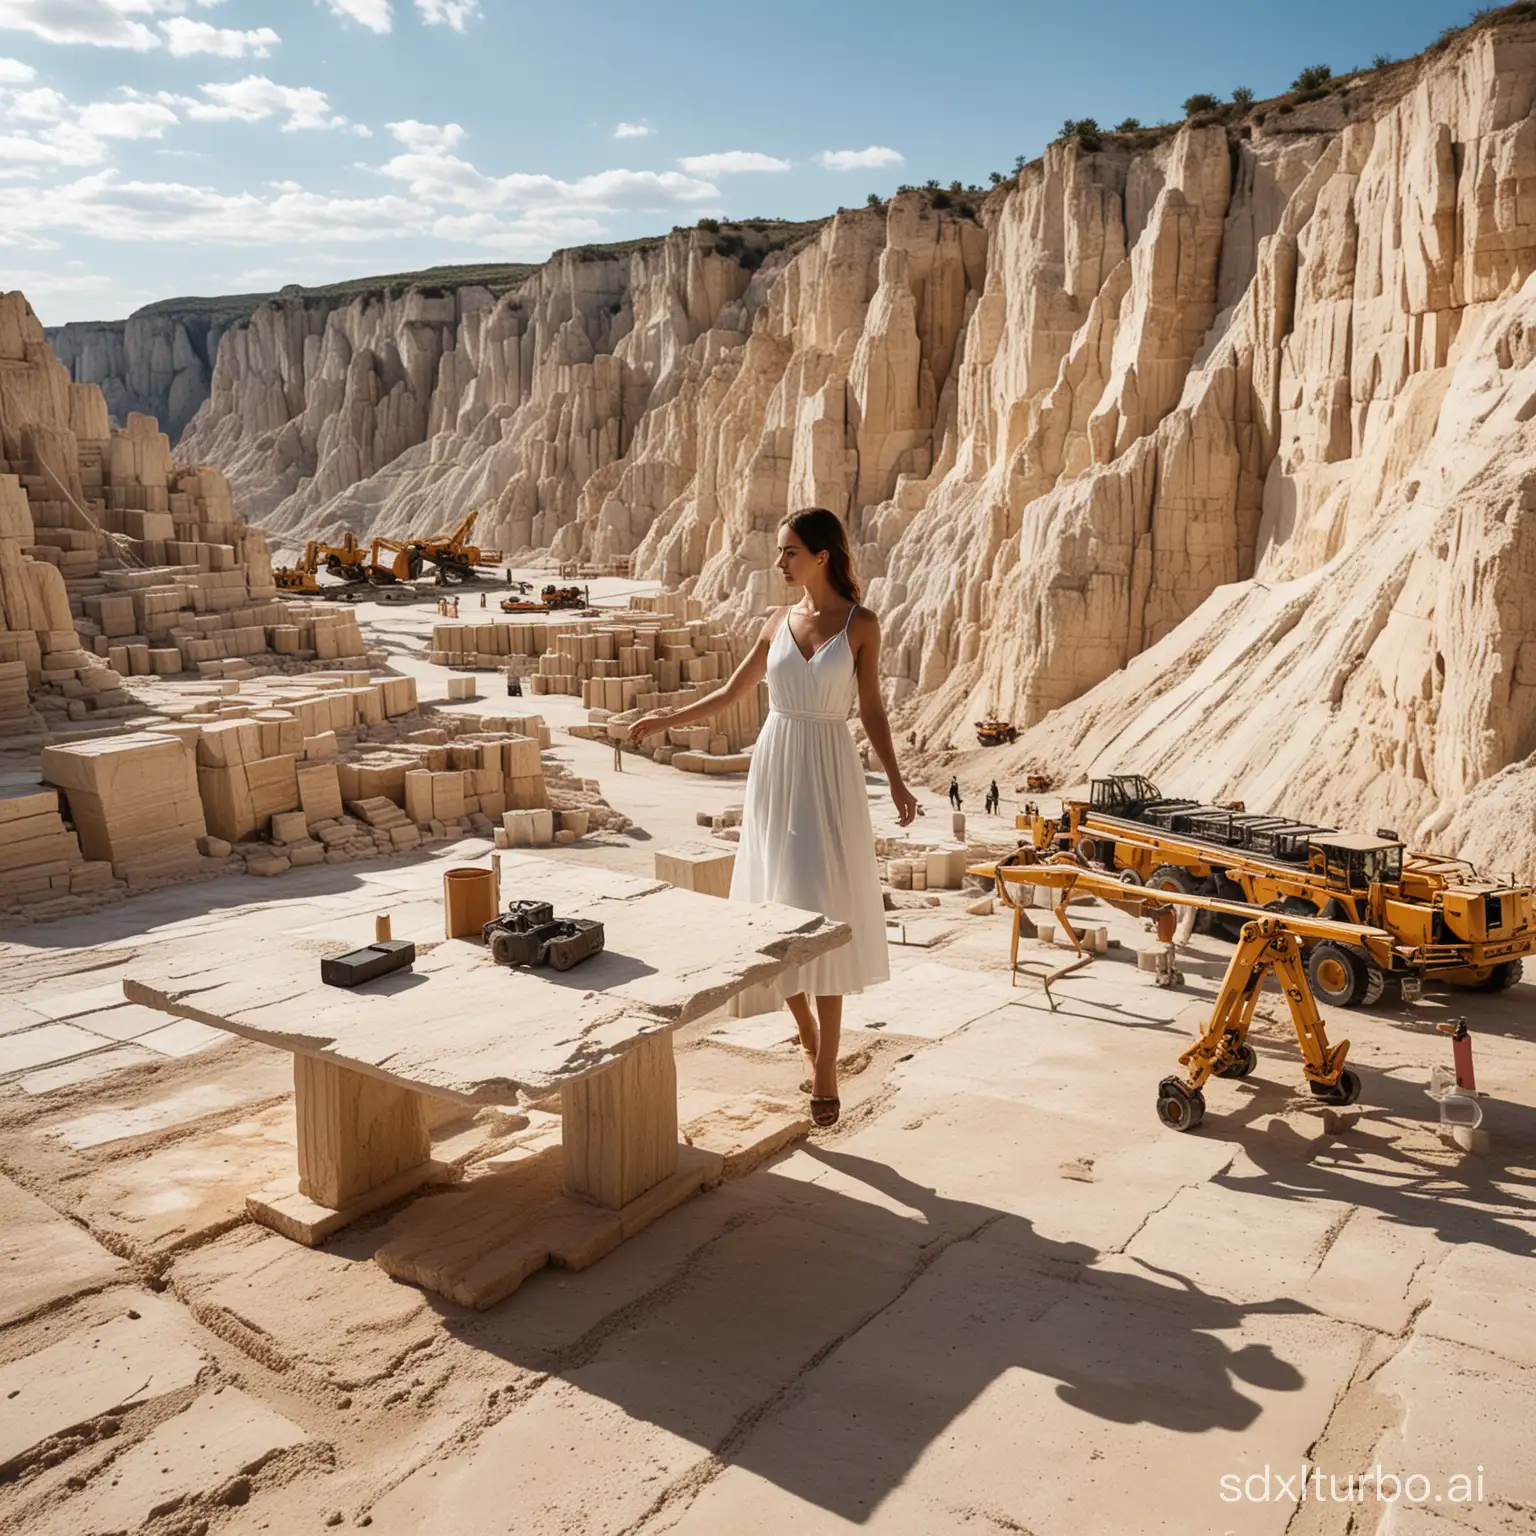 In a travertine stone quarry under a sunny sky, a professional photo shoot is taking place, intended for an Instagram story. The scene is bustling with the activity of heavy machinery and massive walls of travertine blocks. At the center, a sophisticated travertine table is prominently featured. A production team, equipped with high-end full-frame cameras like the Sony Alpha A1, is capturing the moment. A model in a white dress poses elegantly beside the table, adding a striking contrast to the rugged quarry backdrop. Additionally, a large 'N' shaped travertine block enhances the scene, serving as a unique decor element for the shoot.